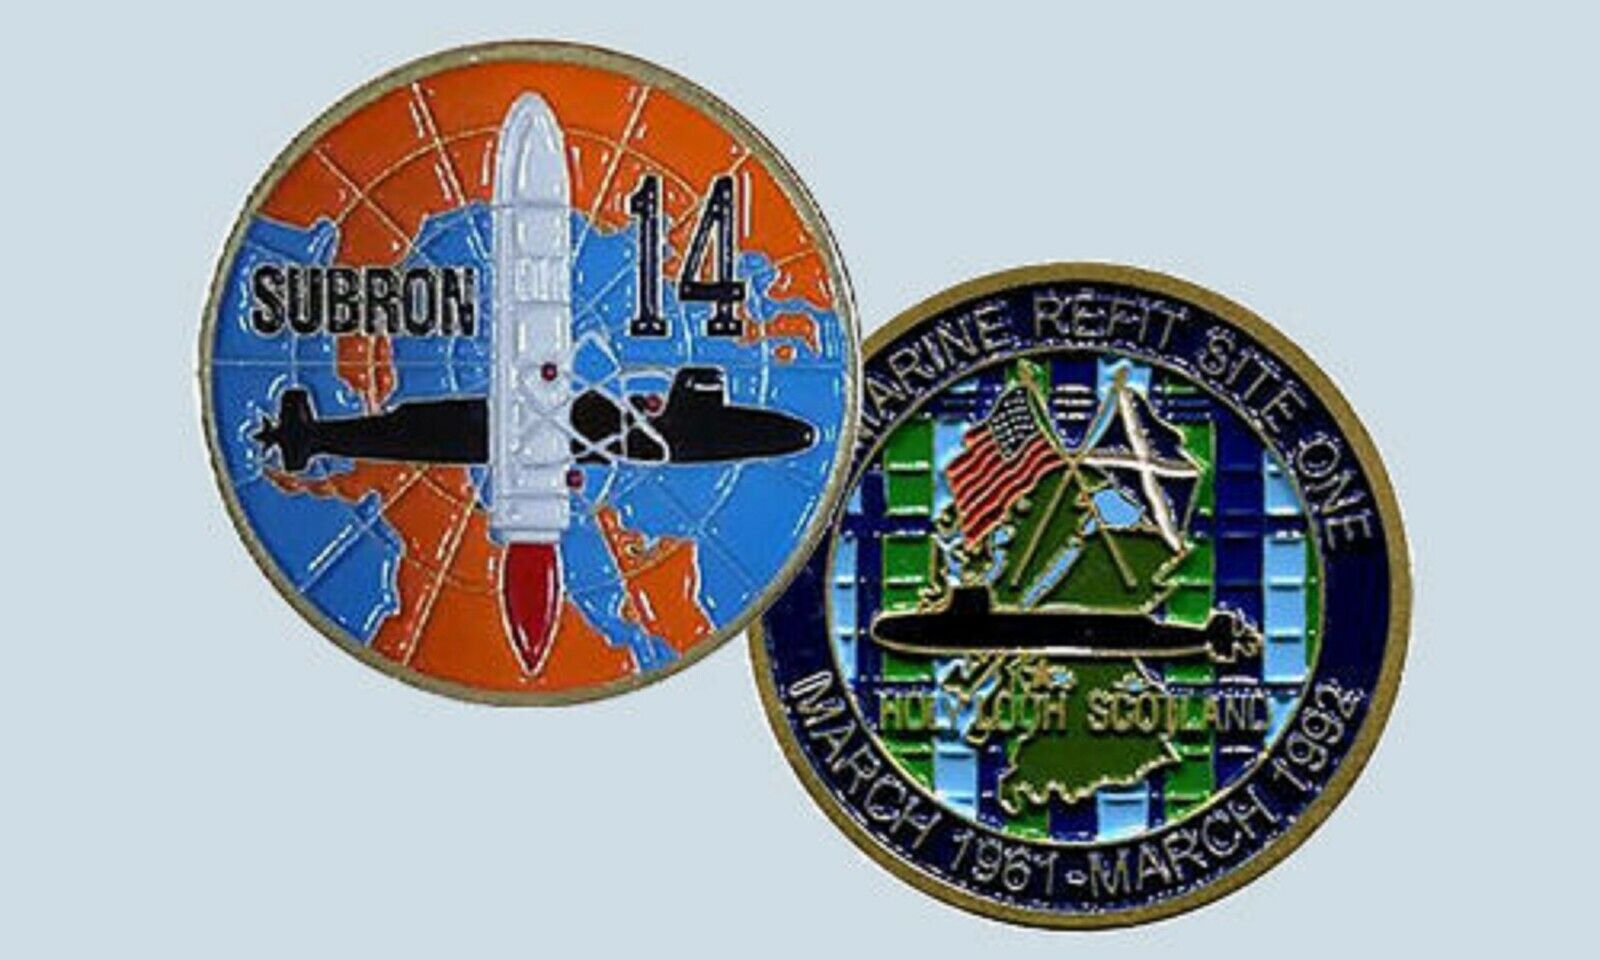 NAVY SUBMARINE SQUADRON 14 FOURTEEN HOLY LOCH SCOTLAND COMSUBRON CHALLENGE COIN